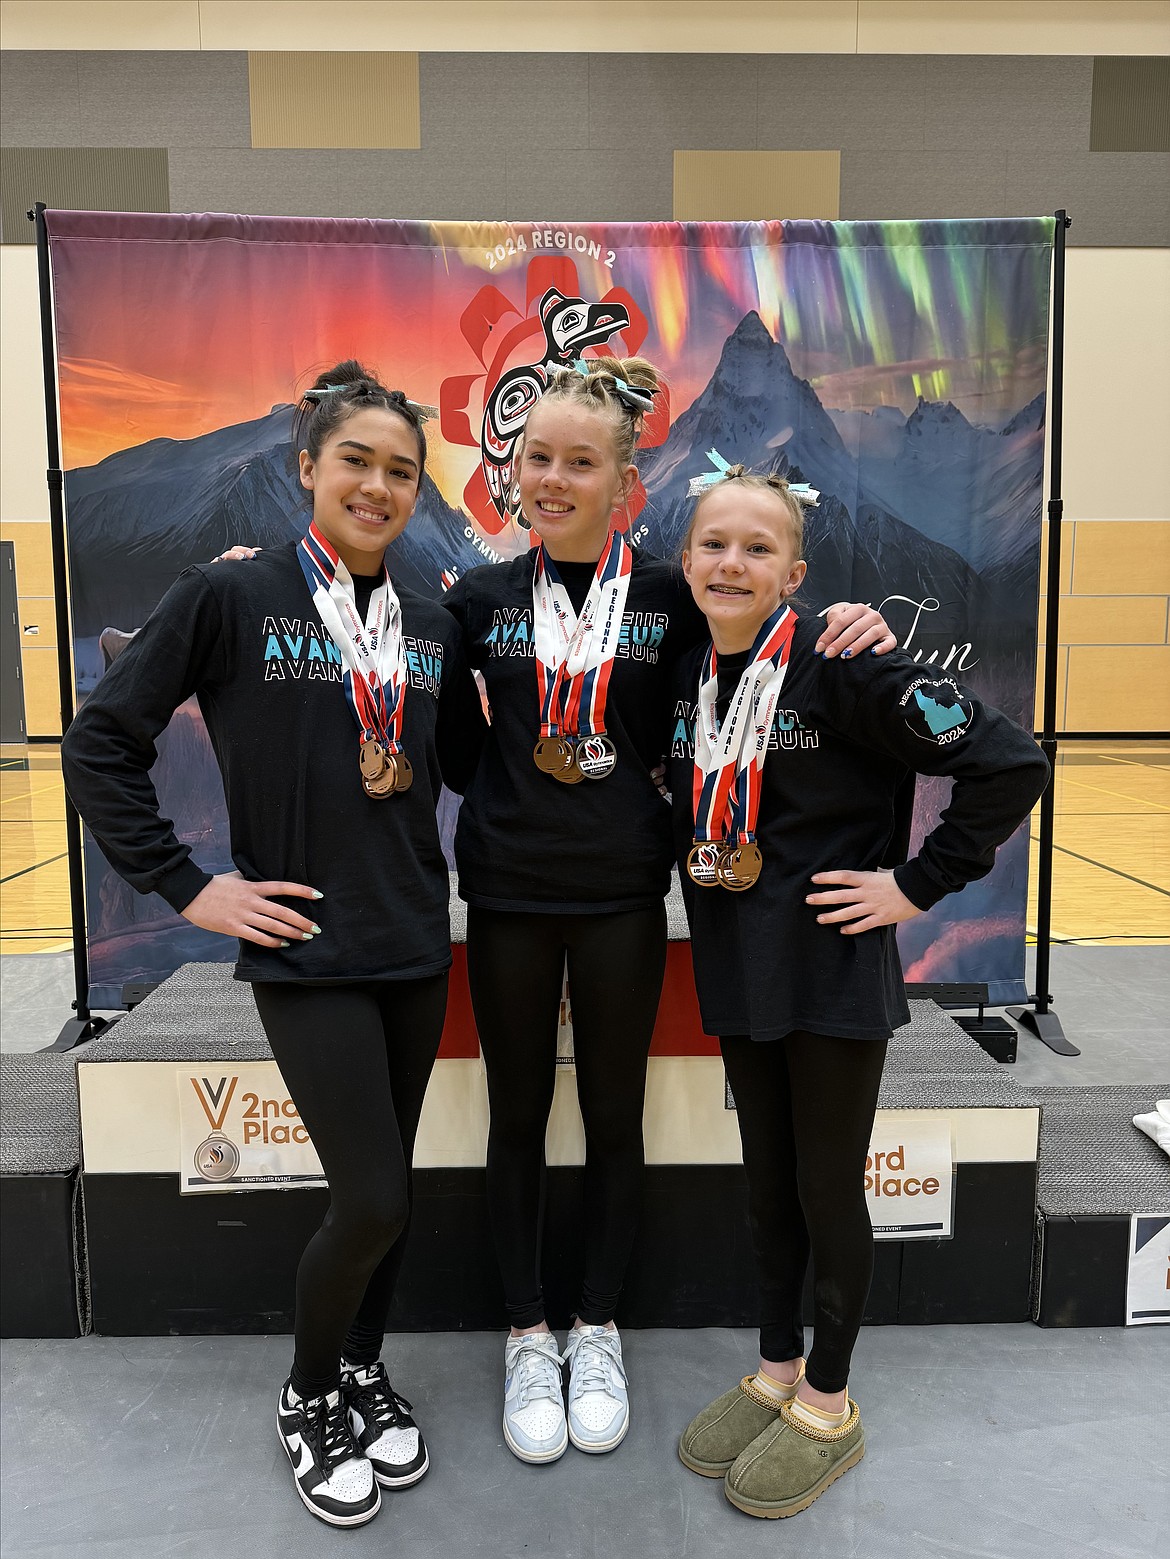 Courtesy photo
Avant Coeur Gymnastics Level 9s competed in Anchorage. Alaska. at the Region 2 regional championships. All three girls qualified on to Western Nationals in Iowa in May, where they will compete against the top Level 9s in the Western part of the United States. From left are Kenzie Short, Avery Hammons and Piper St John.